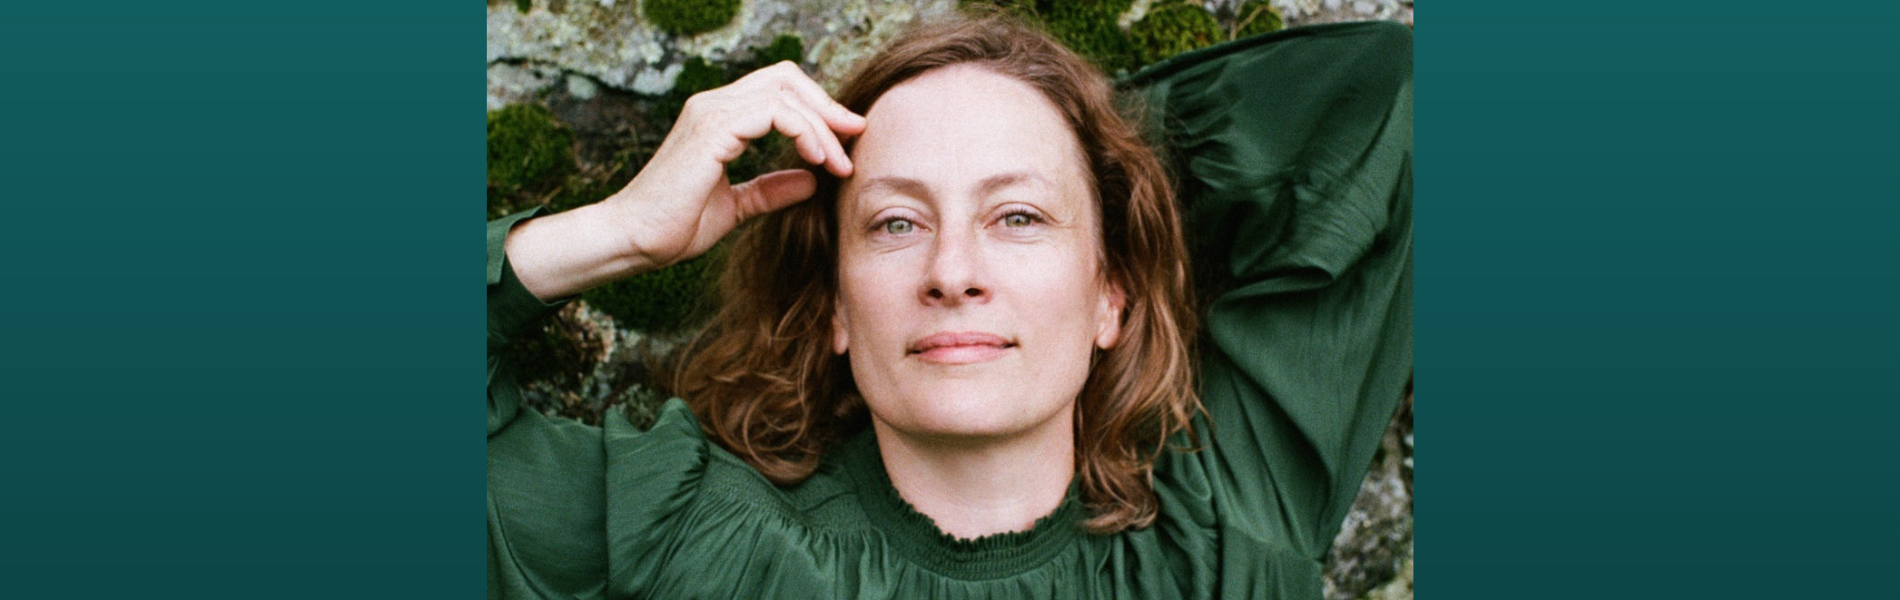 An image of Sarah Harmer in a green shirt with greenery as the back drop.